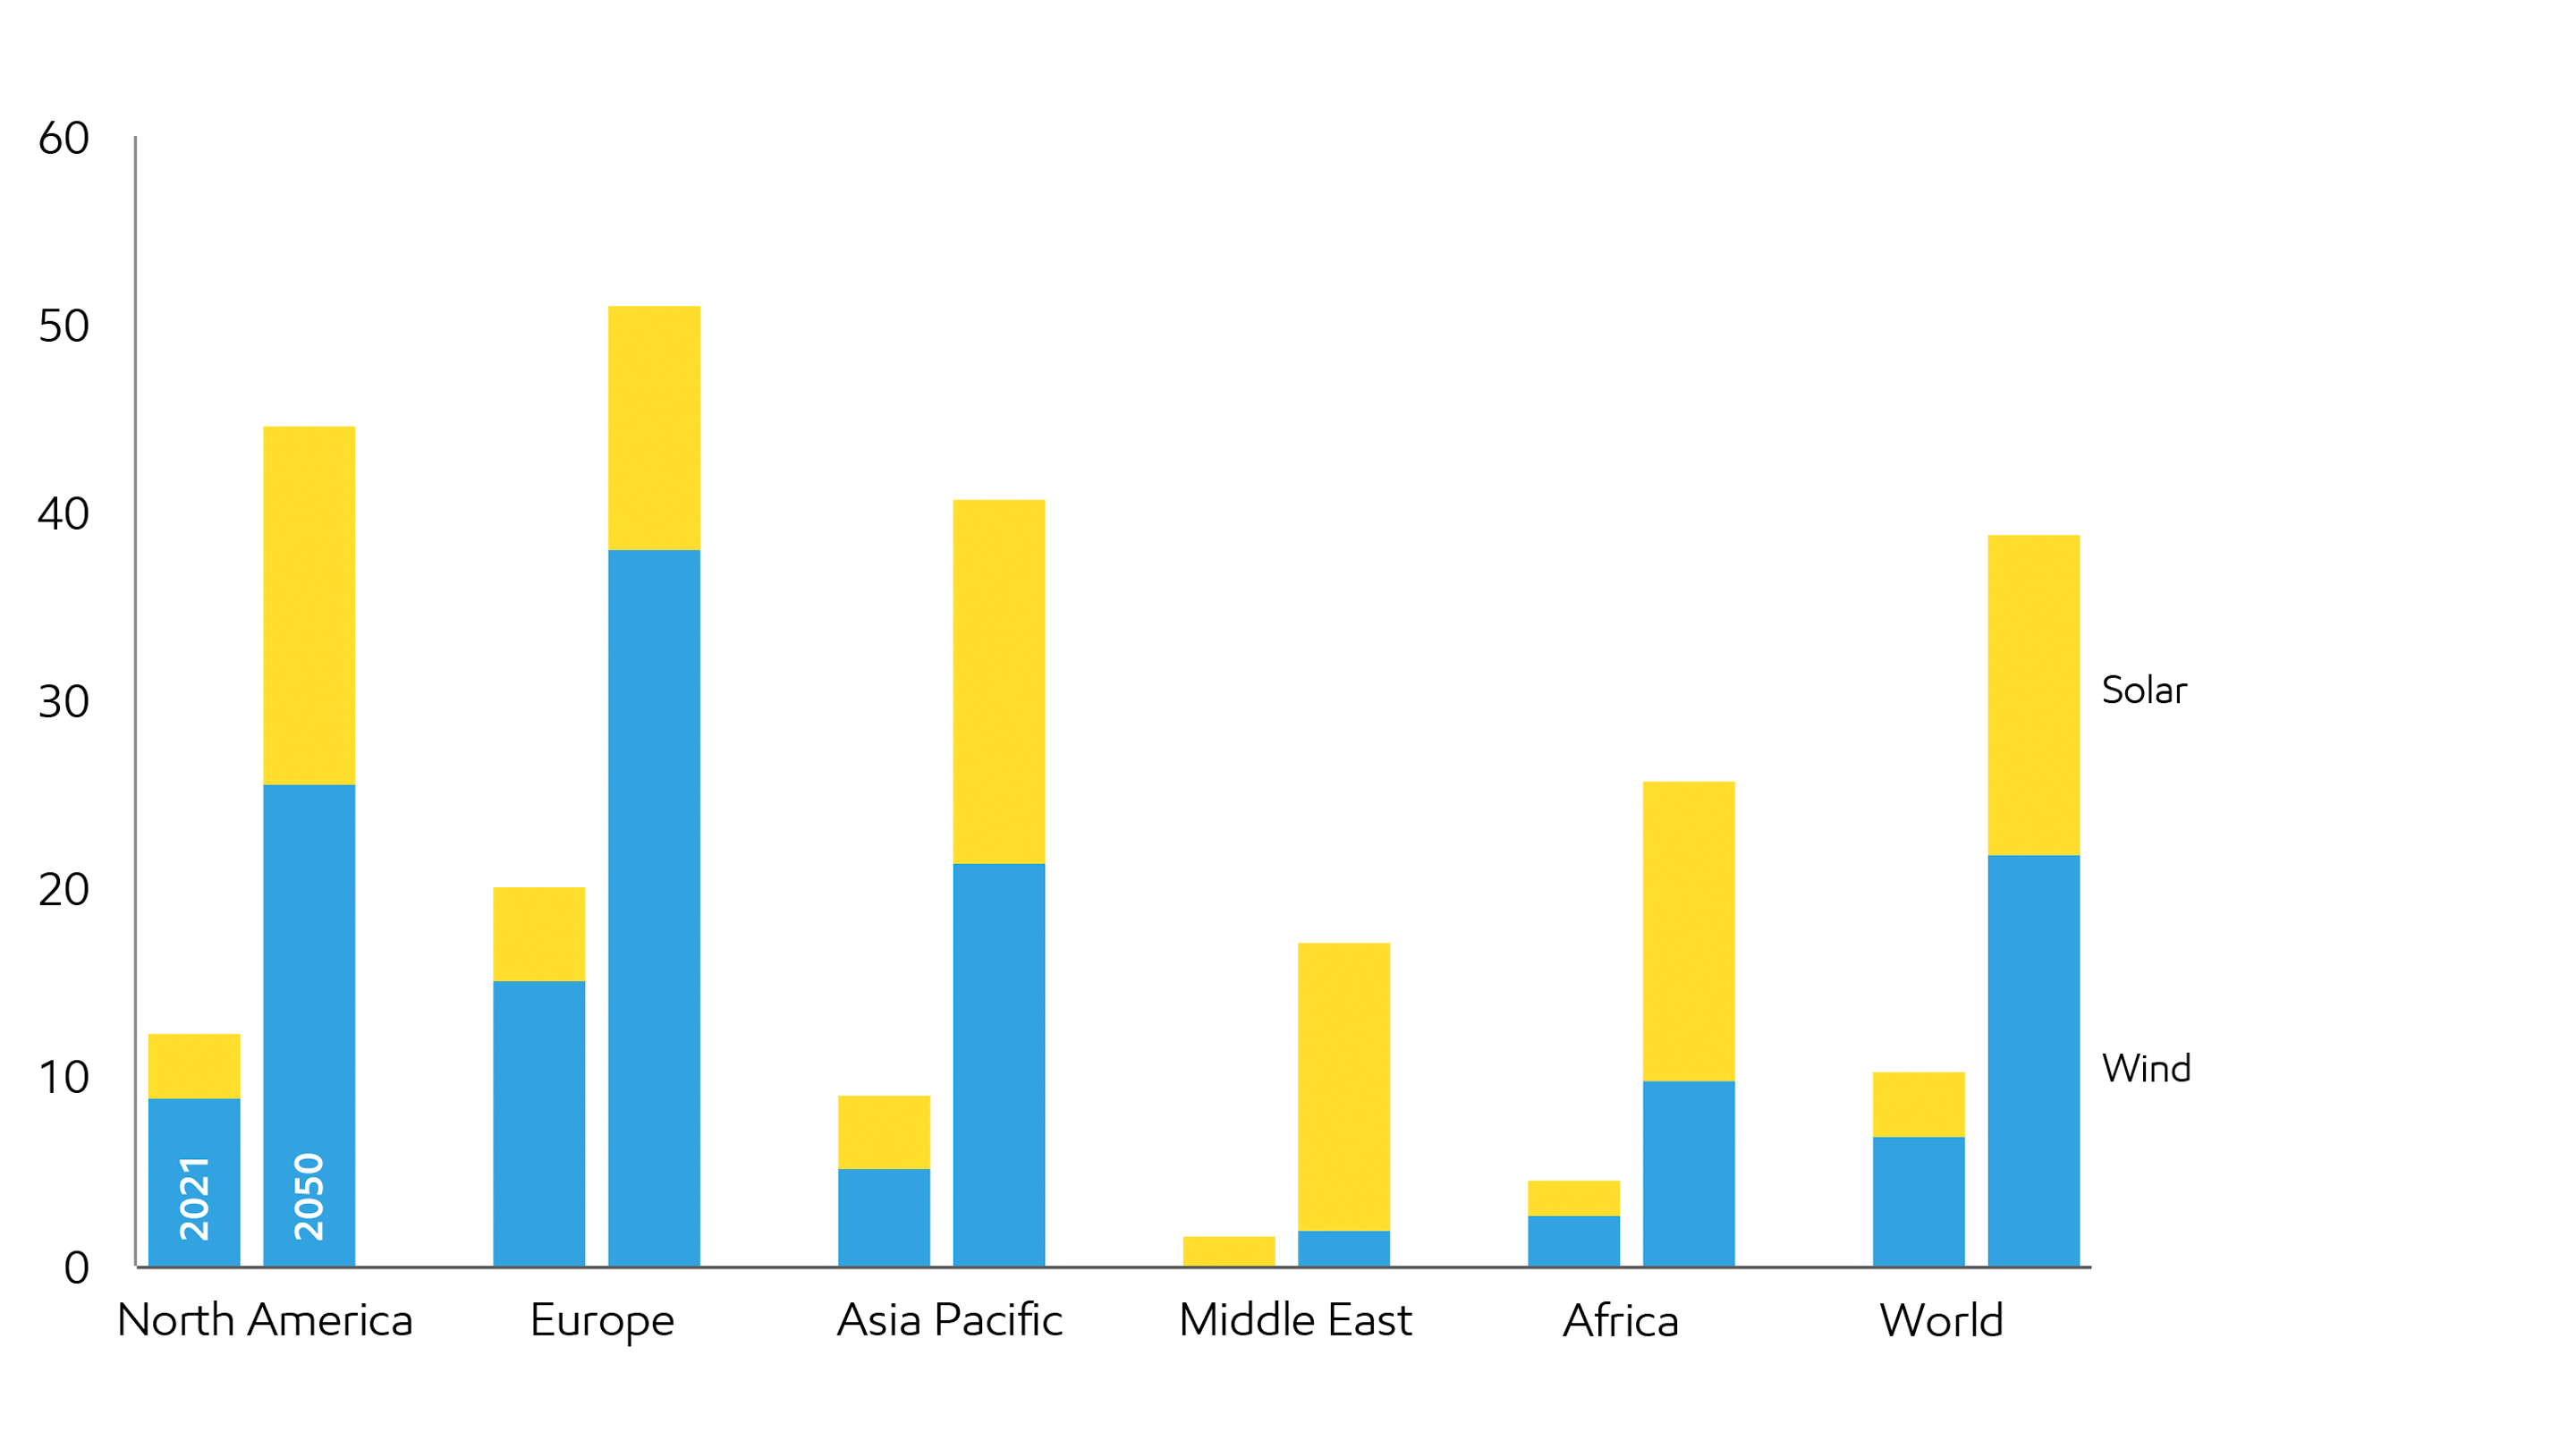 Image Renewables penetration increases across all regions